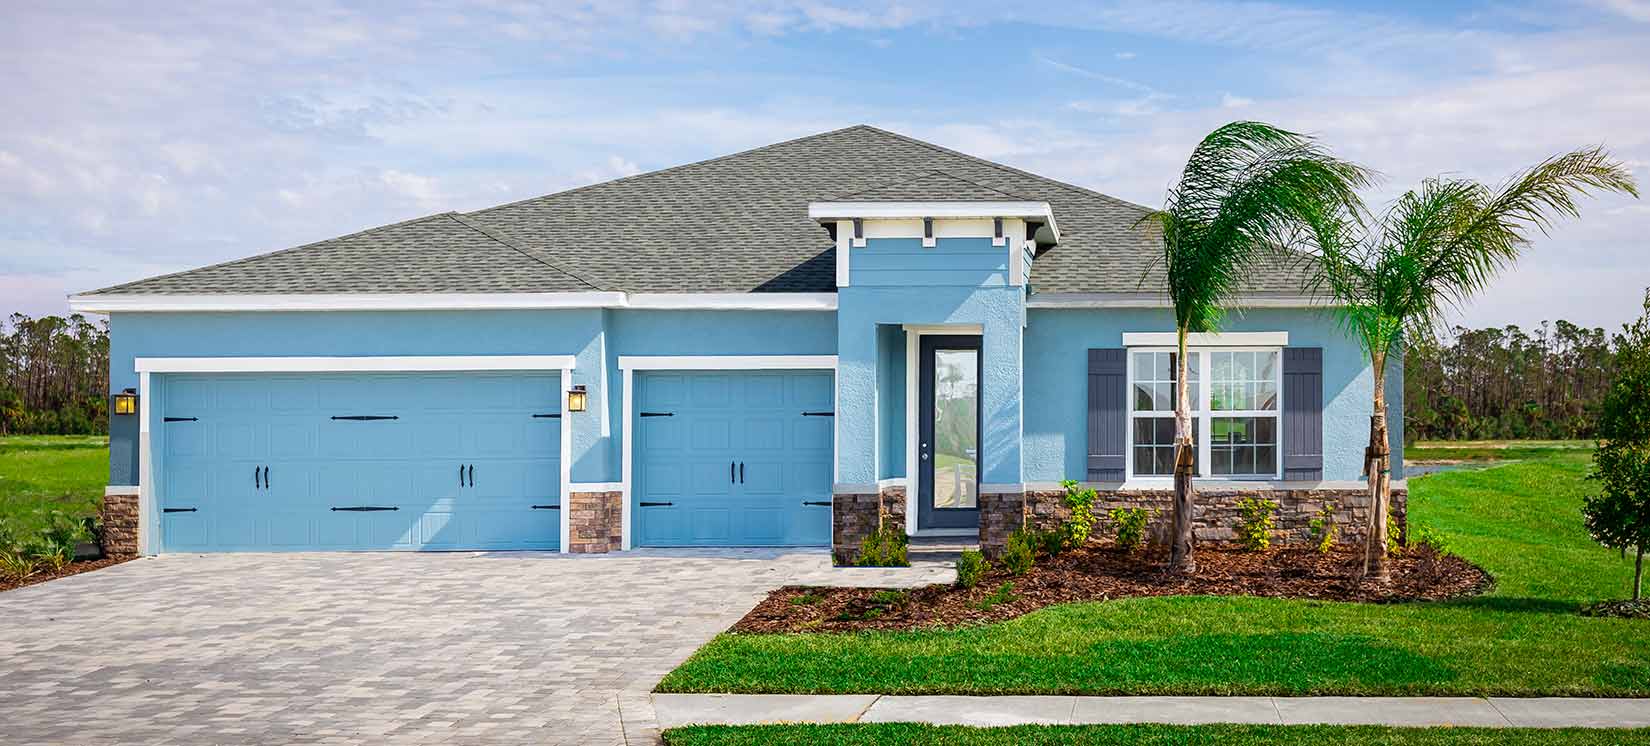 Ryan Homes Panama Model Coming Soon to West Port in Port Charlotte